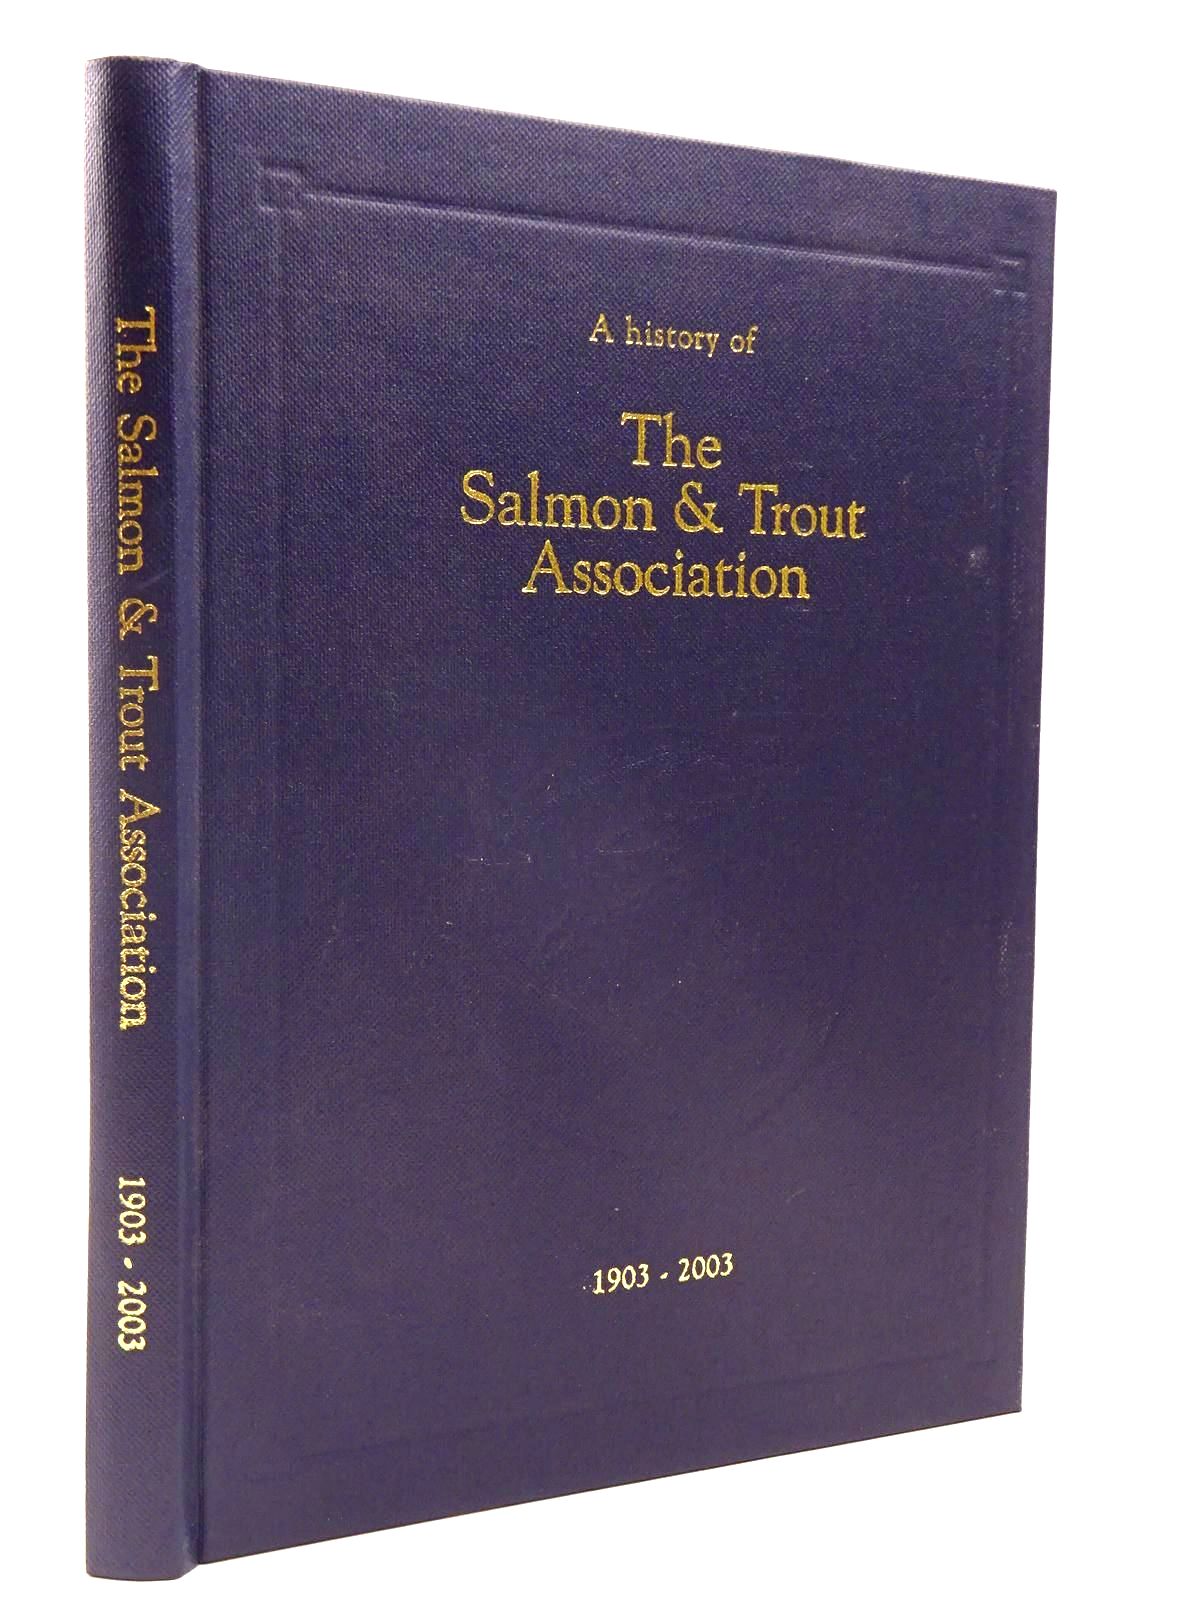 Photo of A HISTORY OF THE SALMON AND TROUT ASSOCIATION 1903 - 2003- Stock Number: 2130324